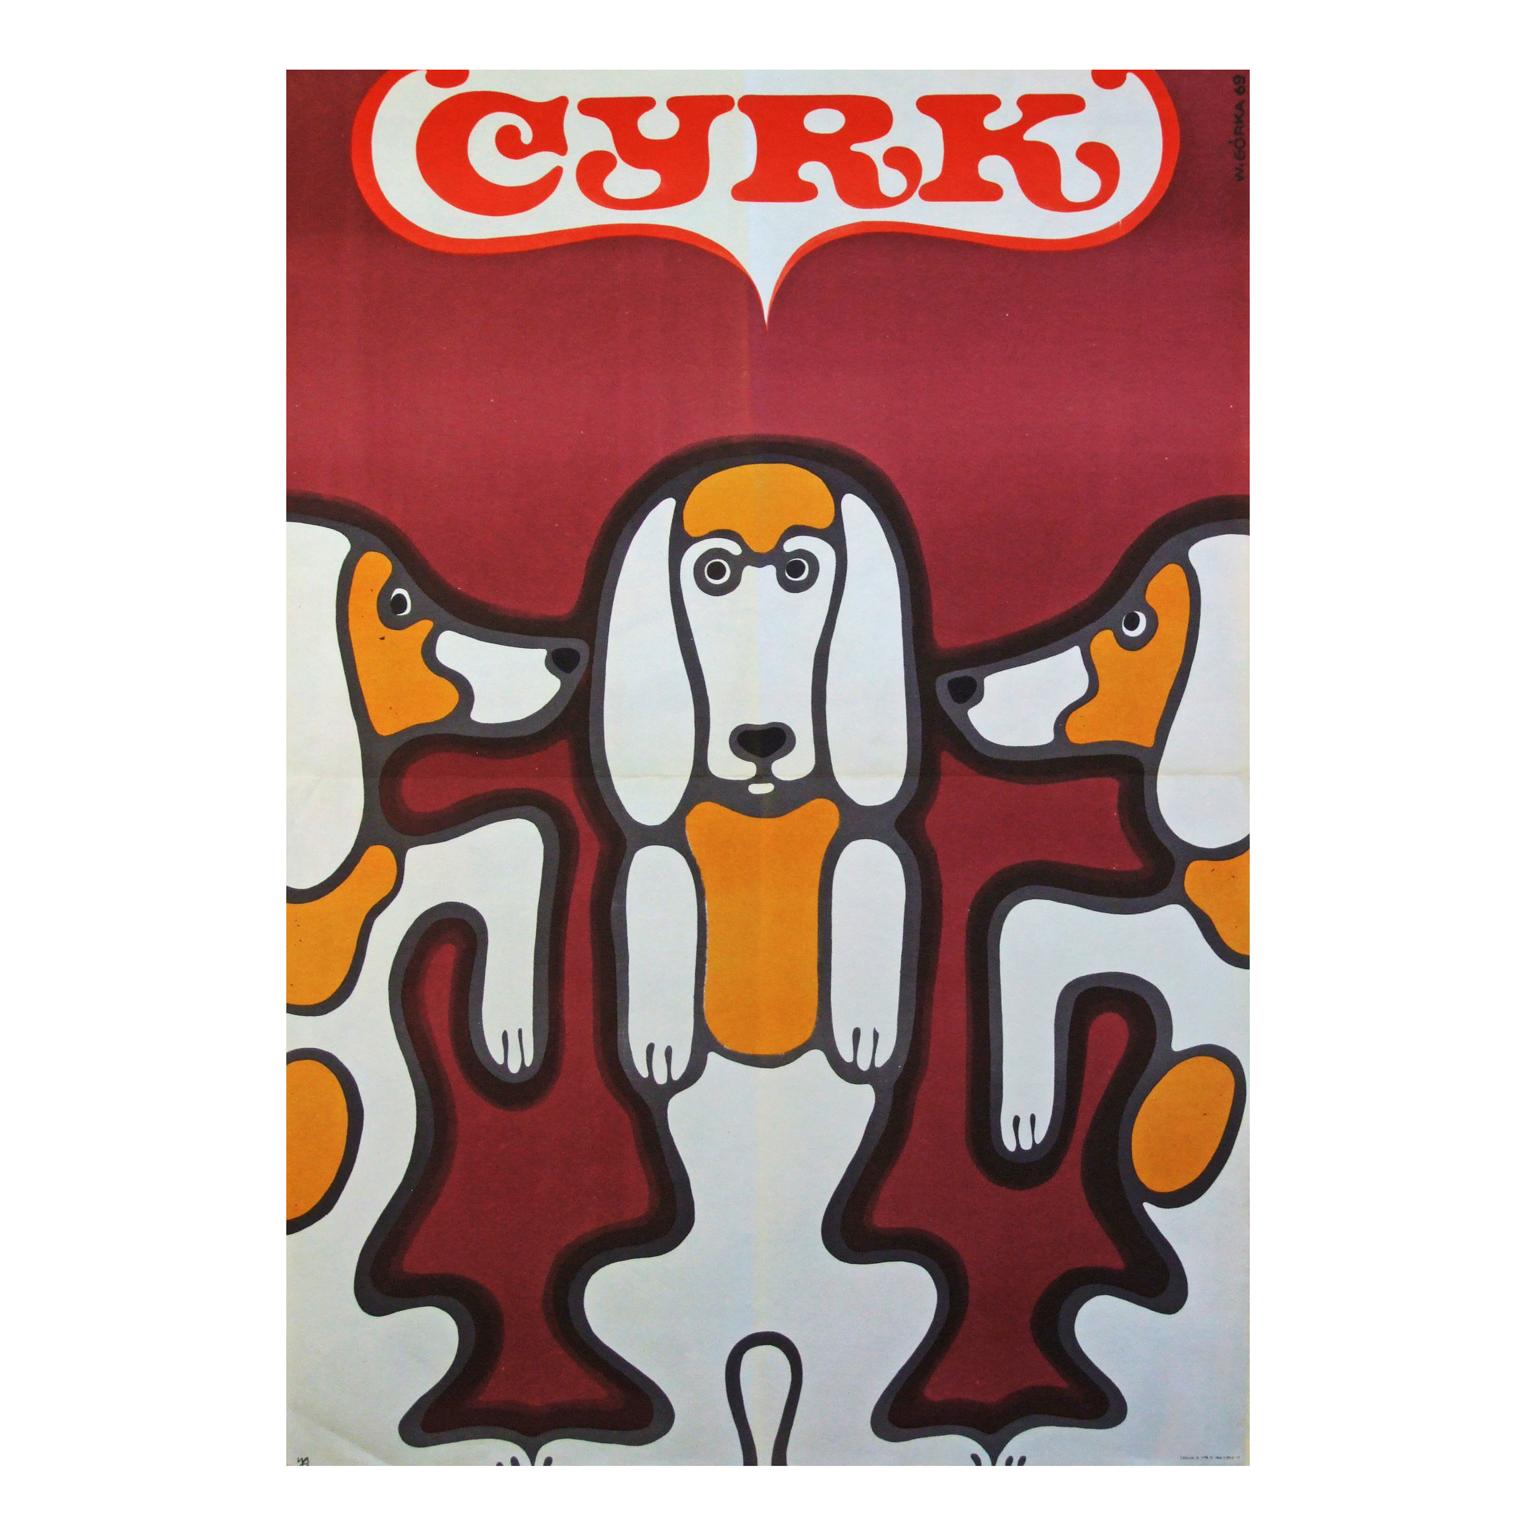 Original 1969 polish circus promotional poster designed by Wiktor Gorka.

First edition color offset lithograph.

Folded.

Measures: L 98cm x W 68cm.